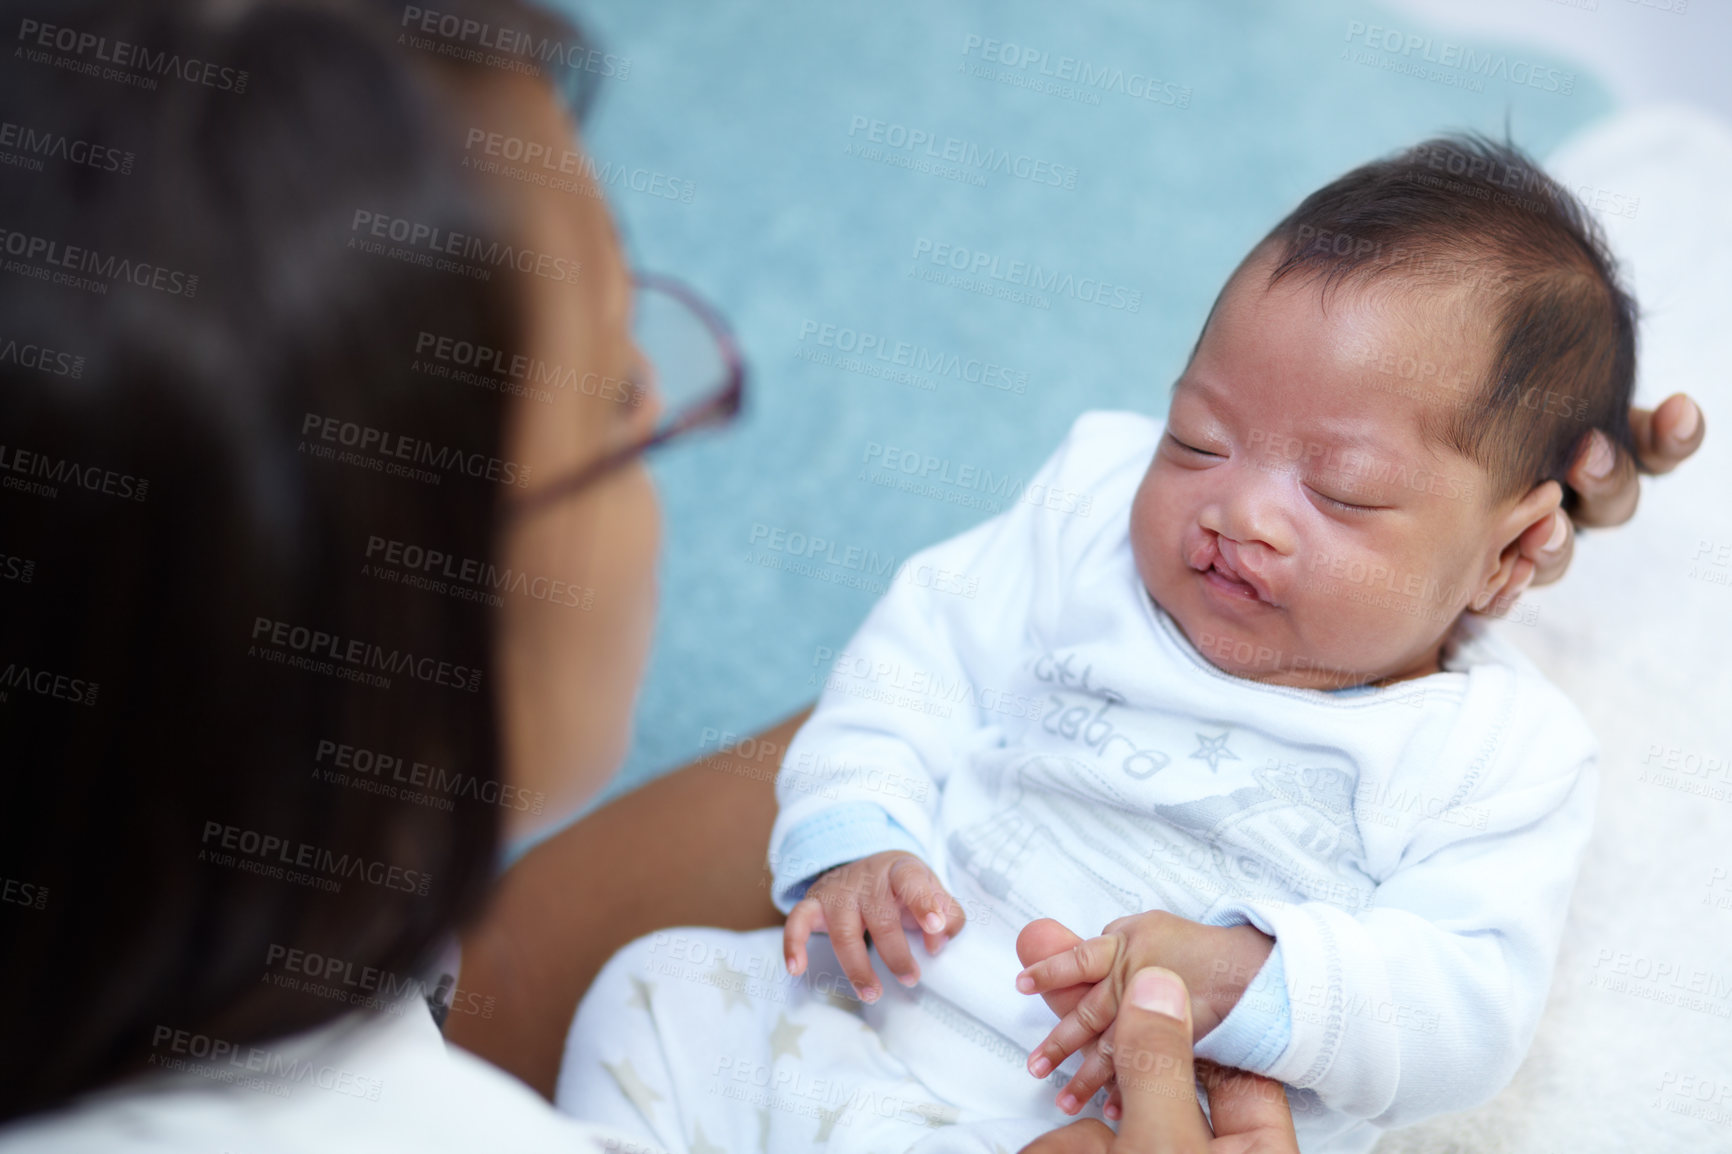 Buy stock photo Shot of a sleeping baby girl with a cleft palate being held by her mother